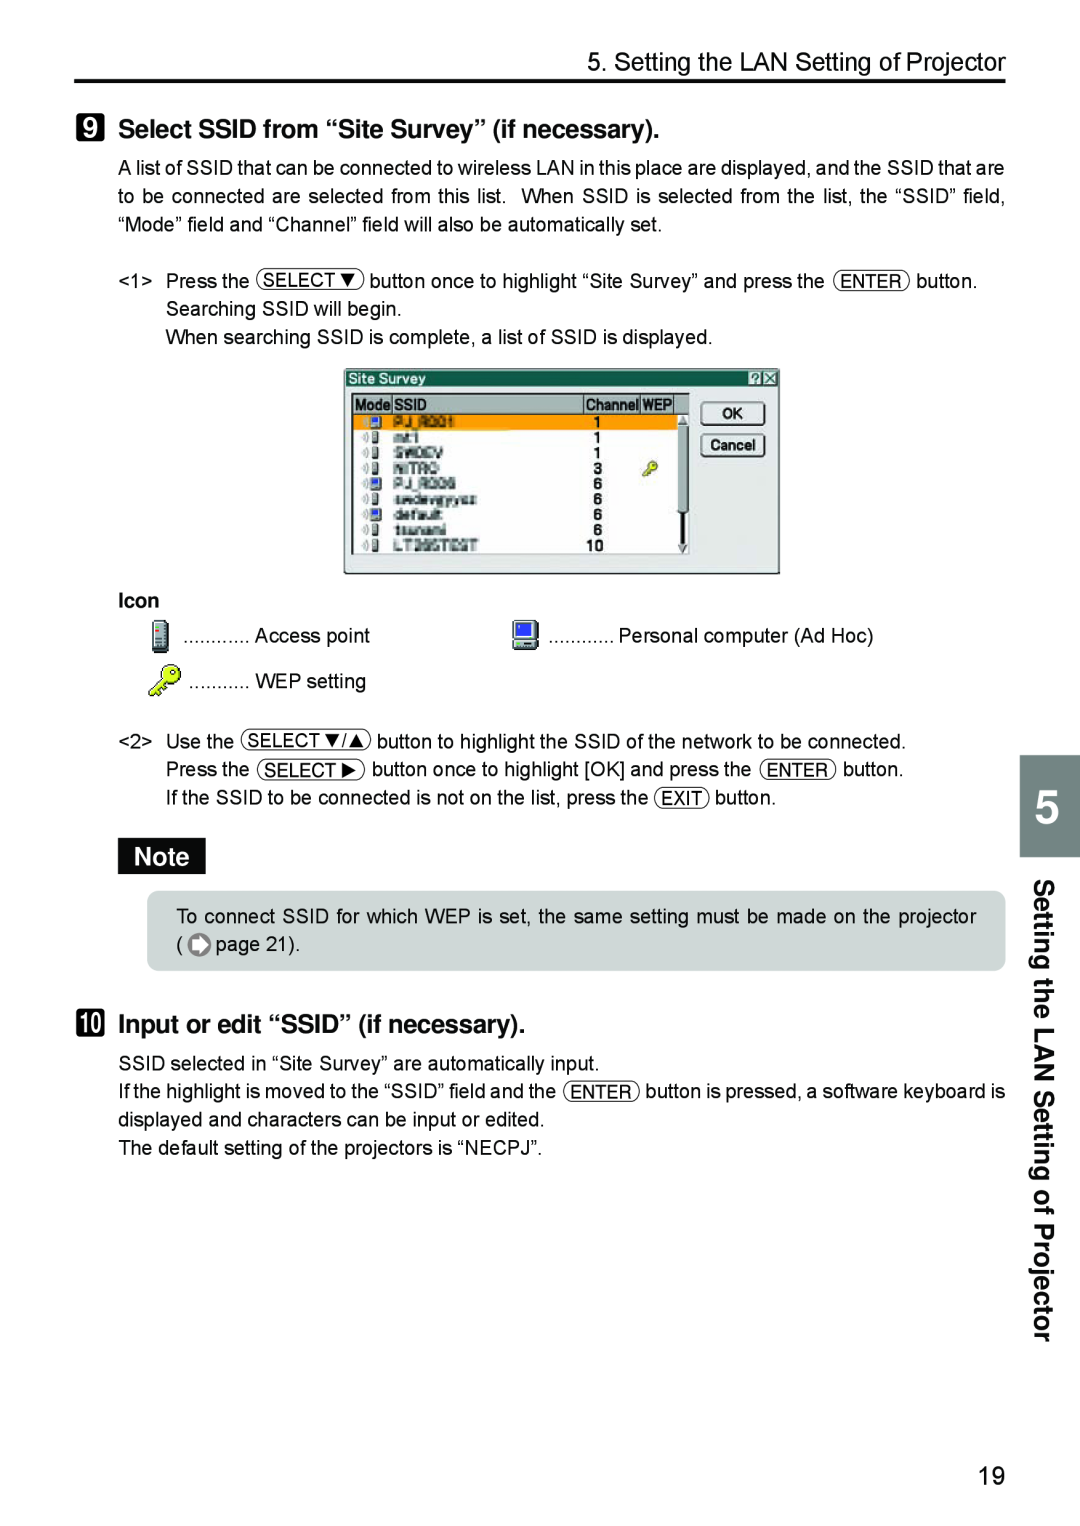 Dukane 8808 user manual Select SSID from “Site Survey” if necessary, Input or edit “SSID” if necessary, Icon 